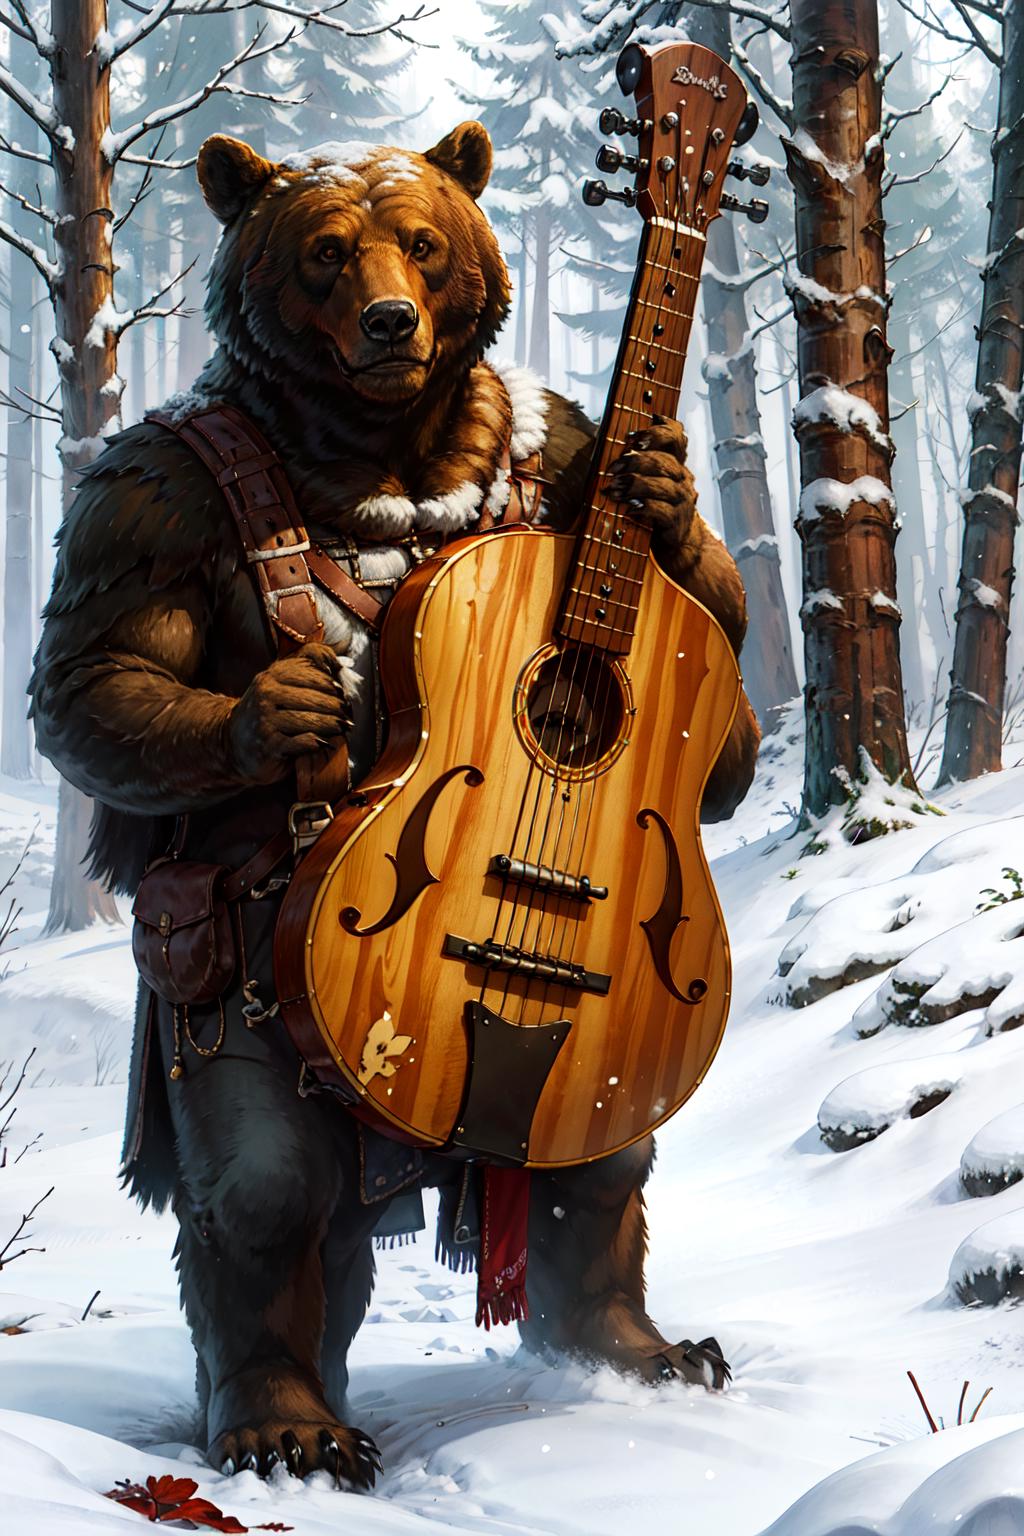 A cartoon drawing of a bear holding a guitar in the snow.